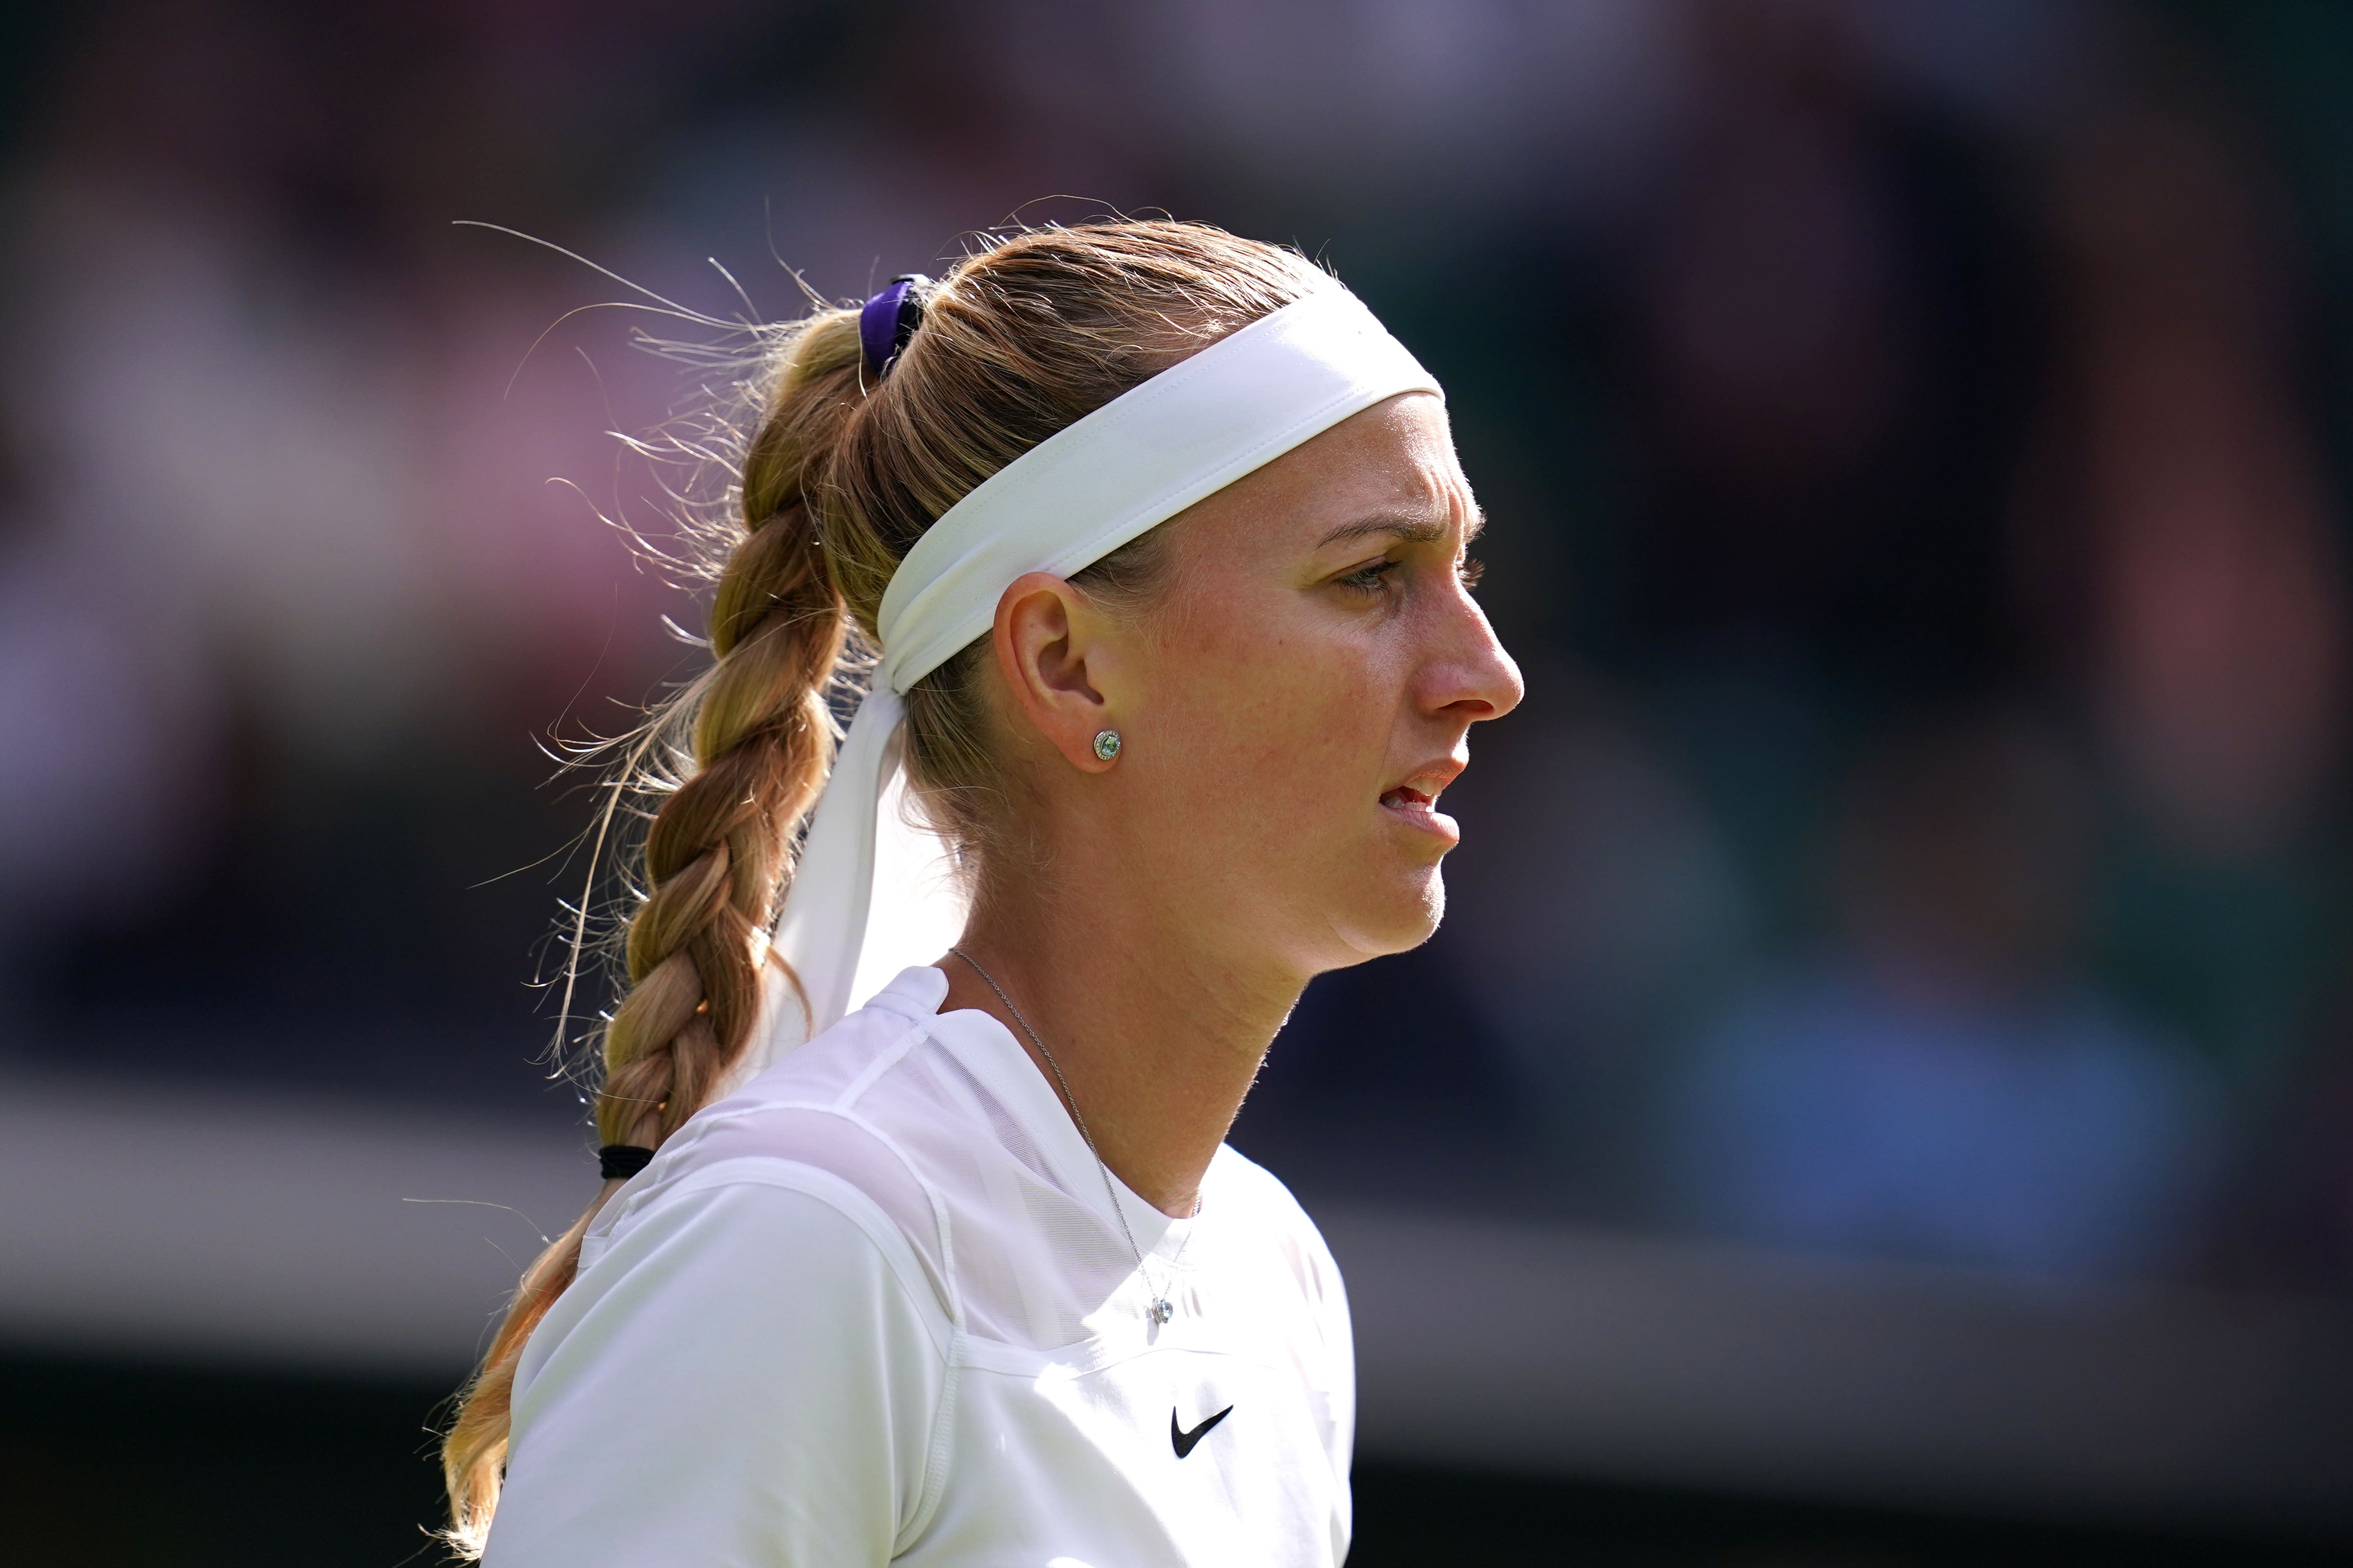 Two-time Wimbledon champion Petra Kvitova said she was “shaken” and “fortunate to be alive” after a knife attack in her apartment (John Walton/PA)